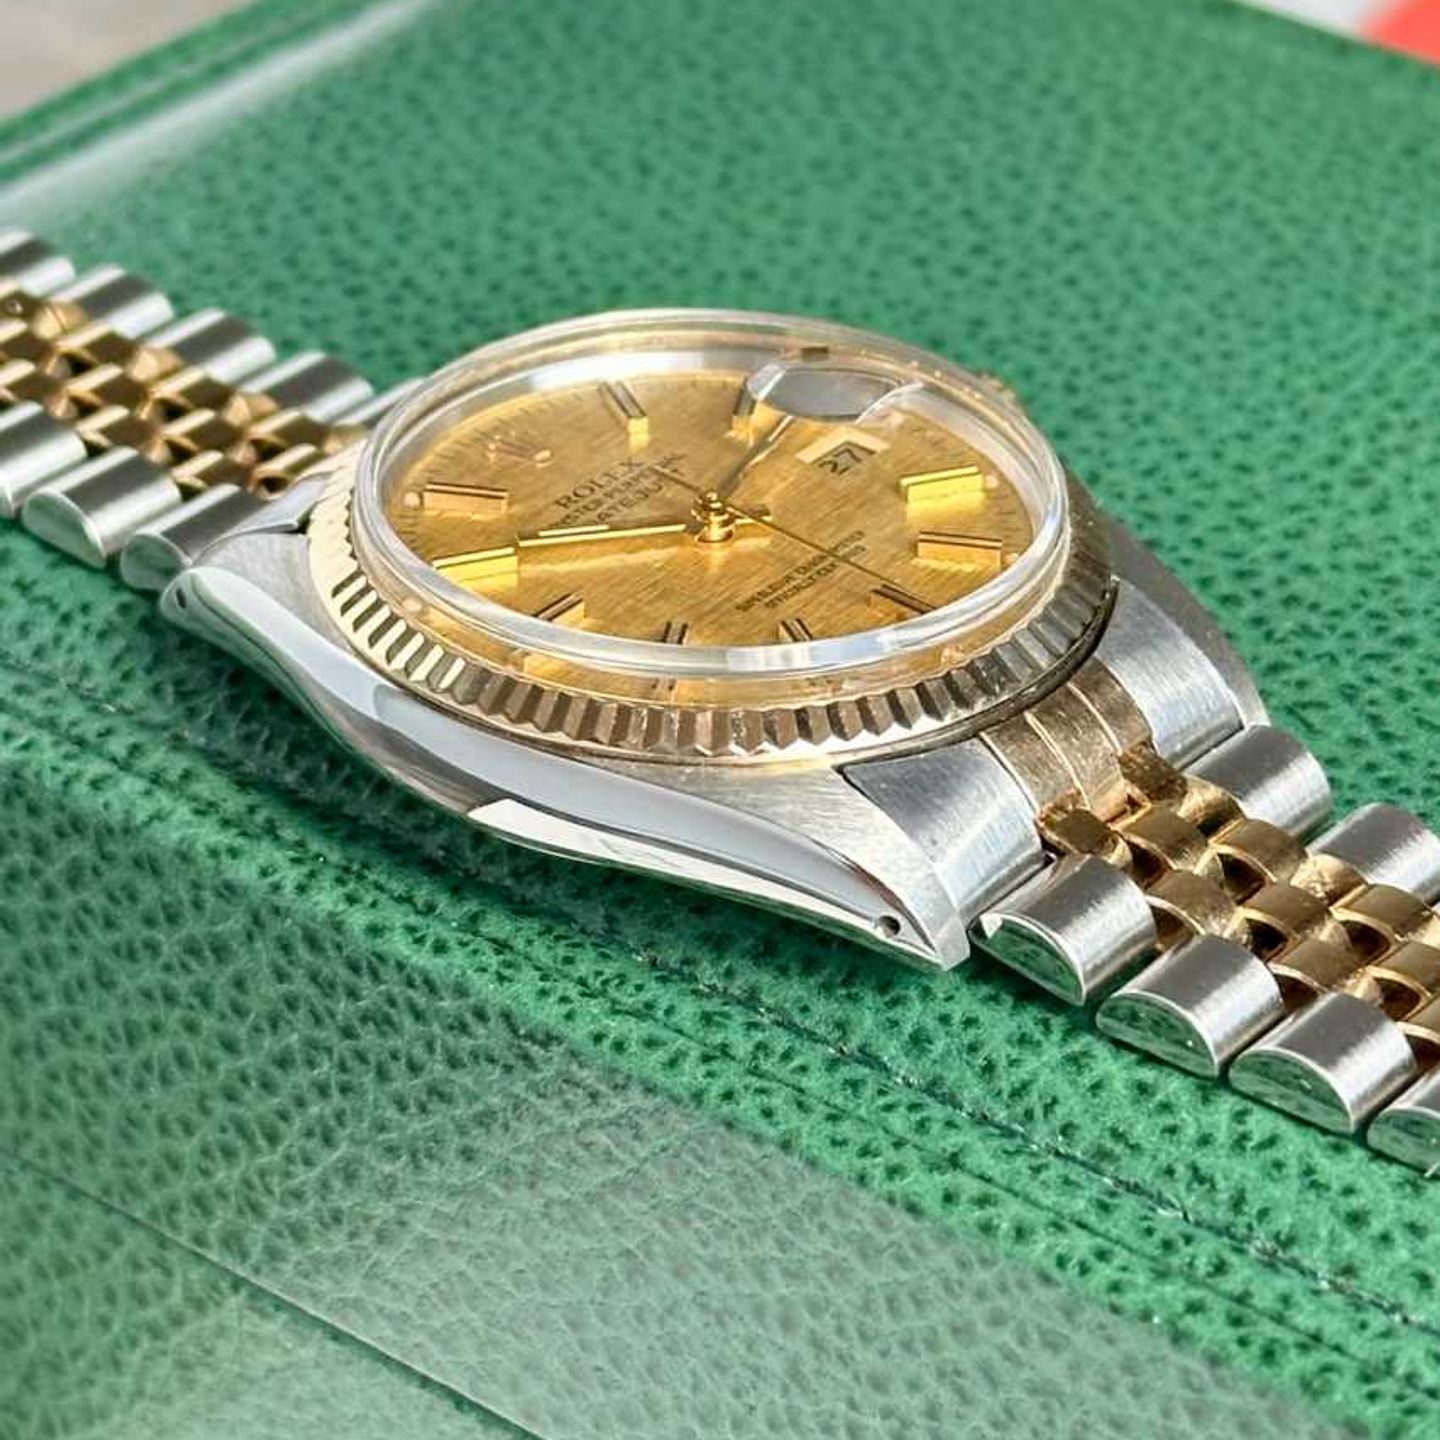 Rolex Datejust 36 16013 (1981) - Gold dial 36 mm Gold/Steel case (8/8)